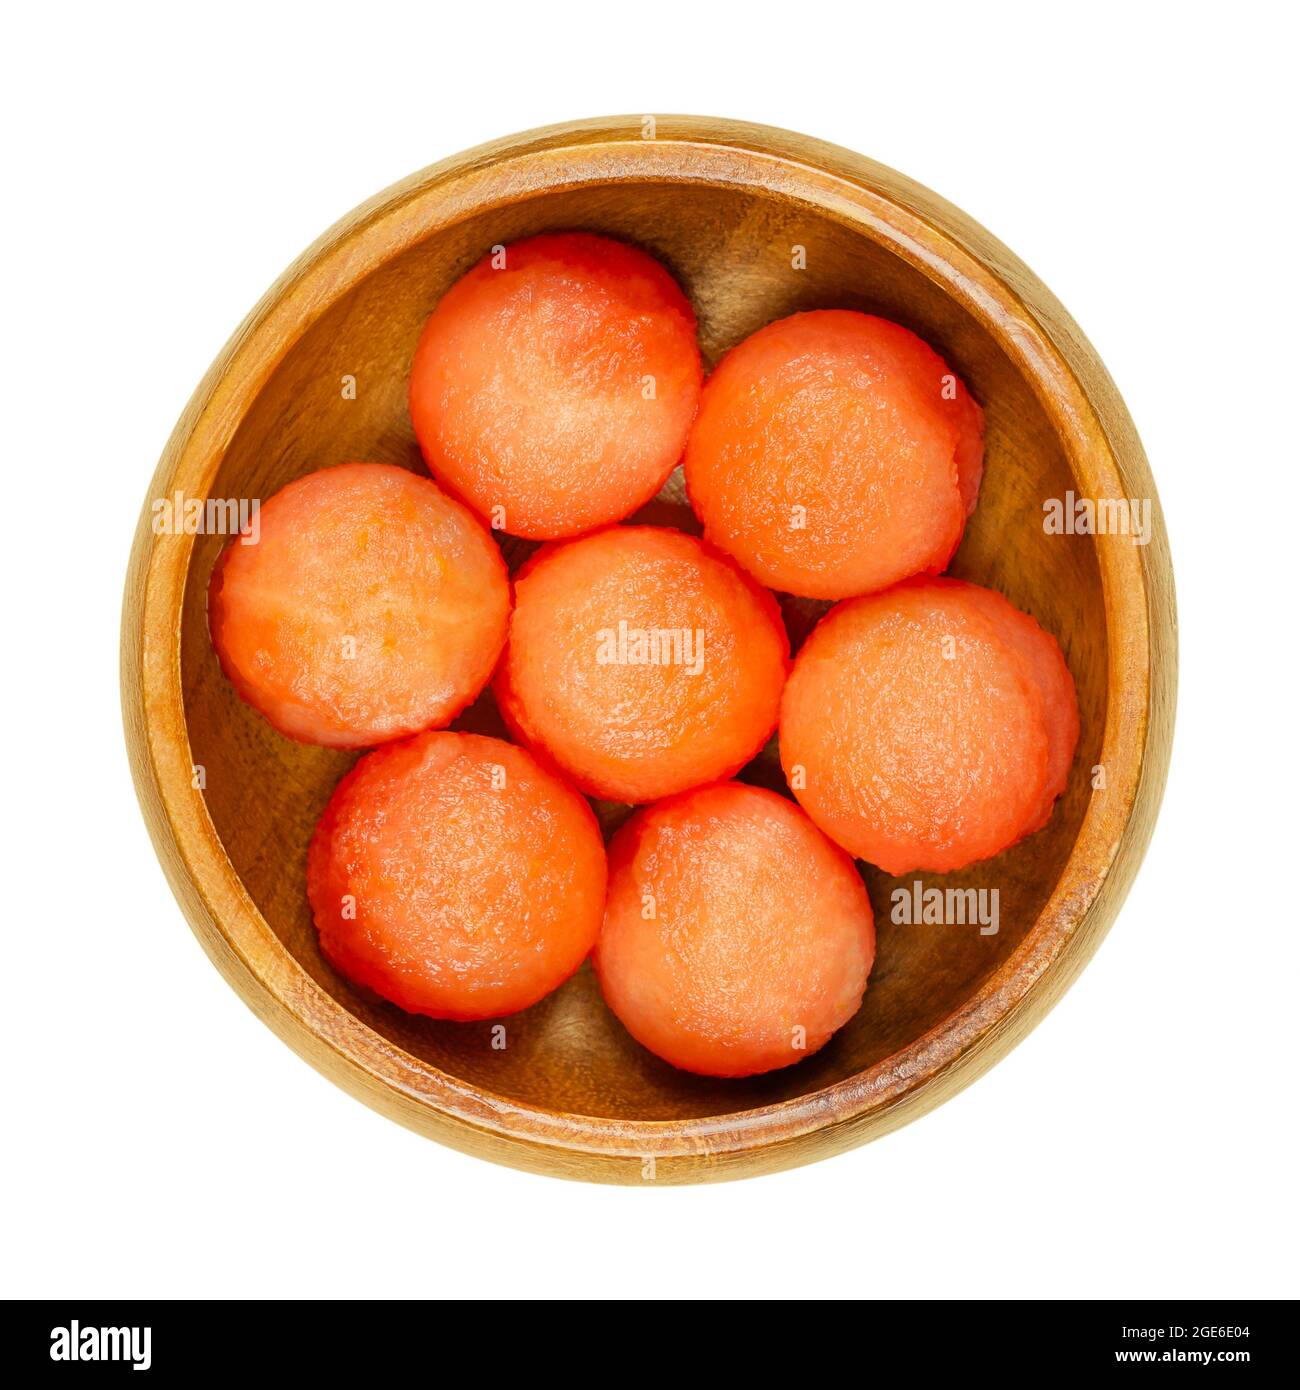 Watermelon balls, in a wooden bowl. With a melon baller freshly cut out spheres, ready-to-eat pieces of ripe and seedless fruit of Citrullus lanatus. Stock Photo